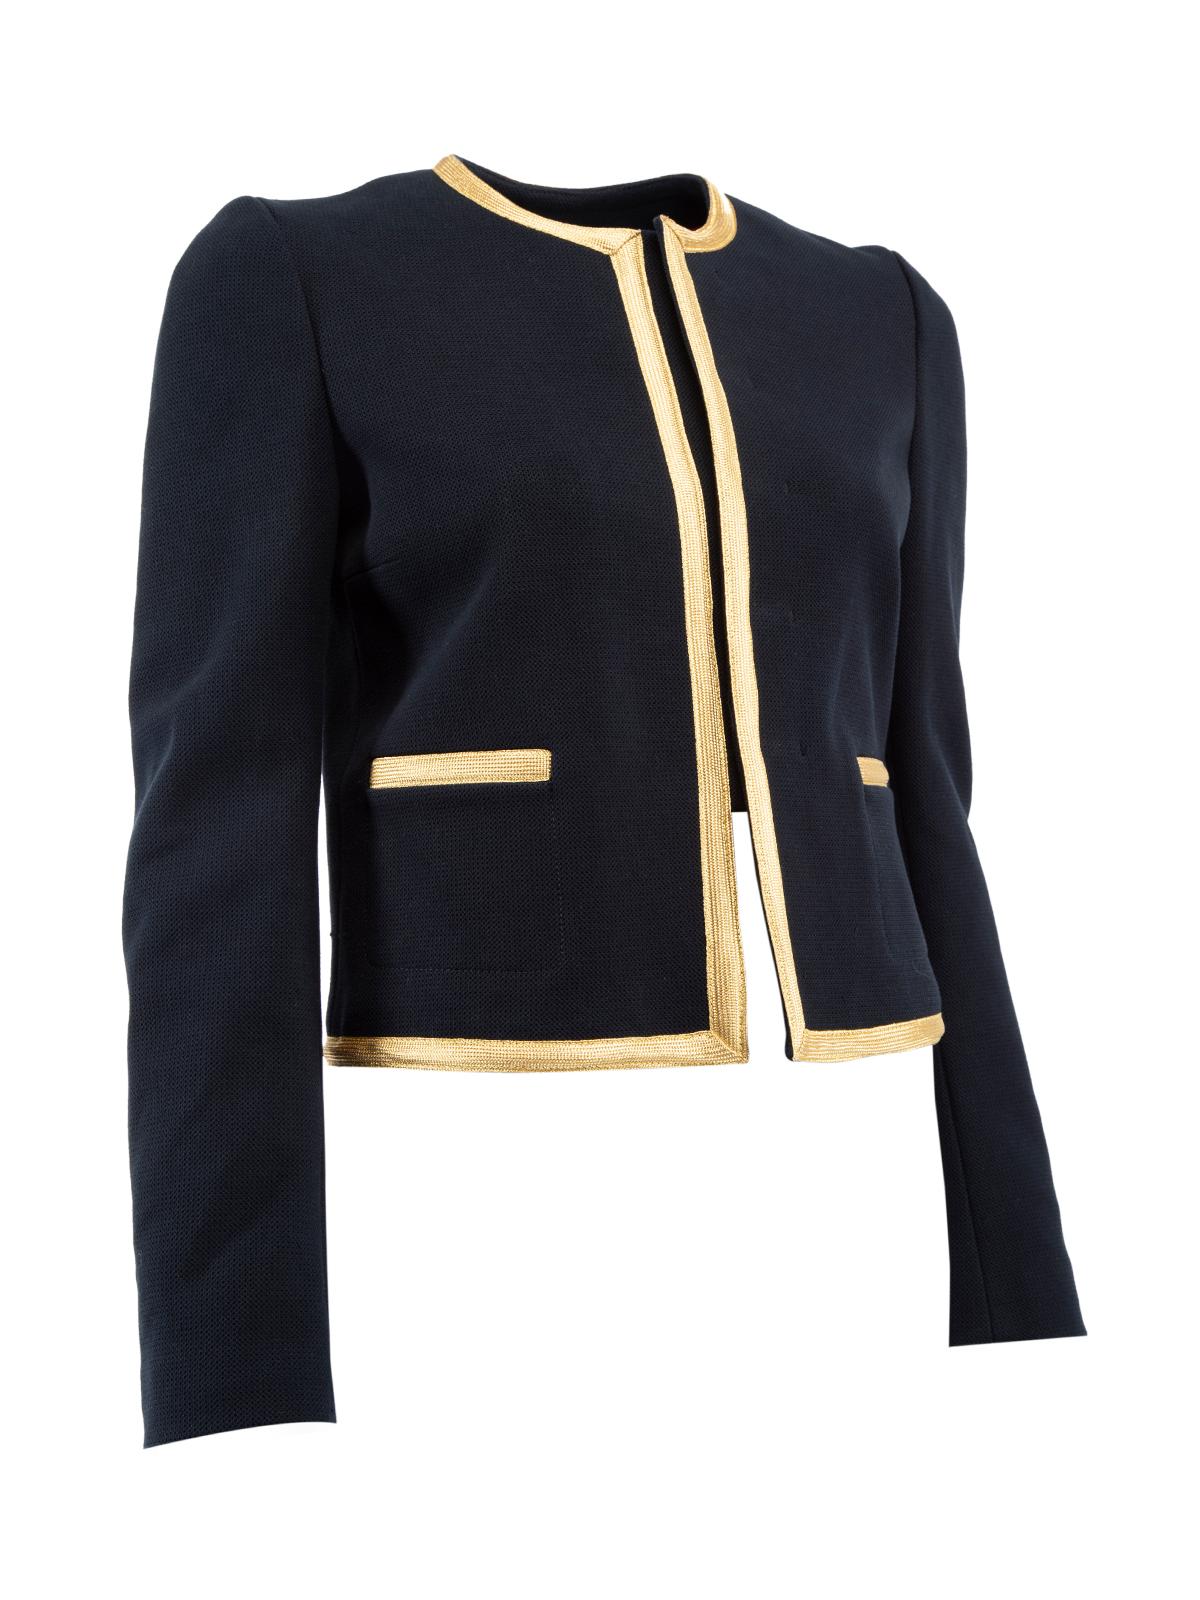 CONDITION is Very good. Hardly any visible wear to jacket is evident on this used Joseph designer resale item. Details Navy Cotton Smart fit False pockets on front Press stud fastening Round neck Made in POLAND Composition 97% COTTON, 3% ELASTANE